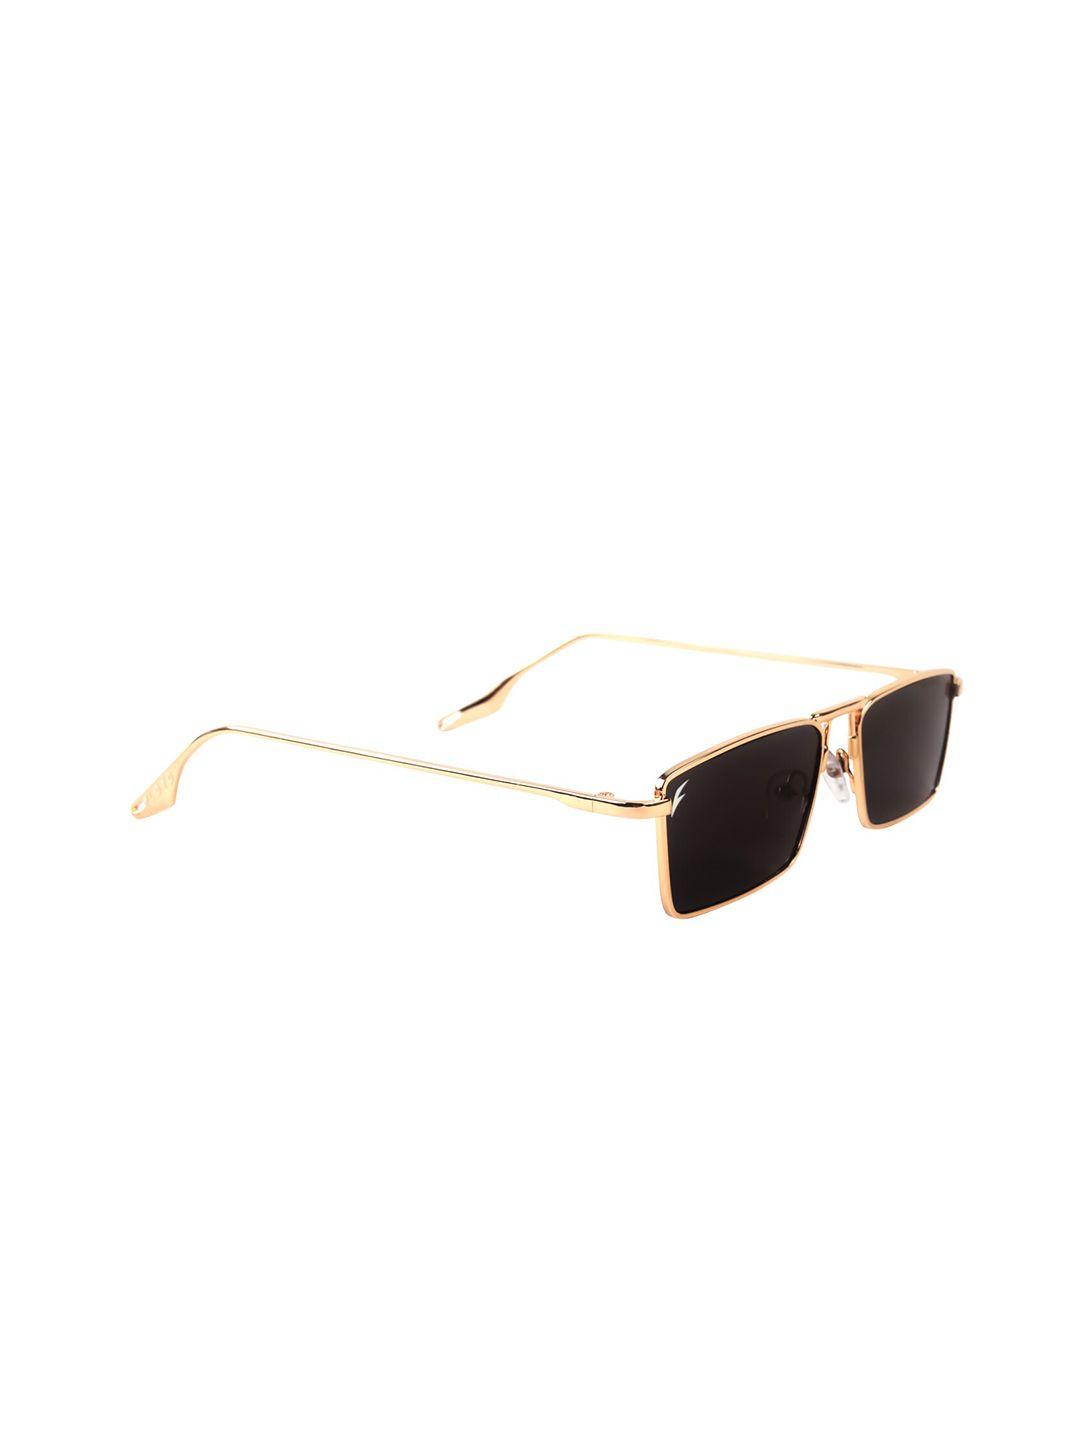 floyd square sunglasses with uv protected lens 6216_gld_blk